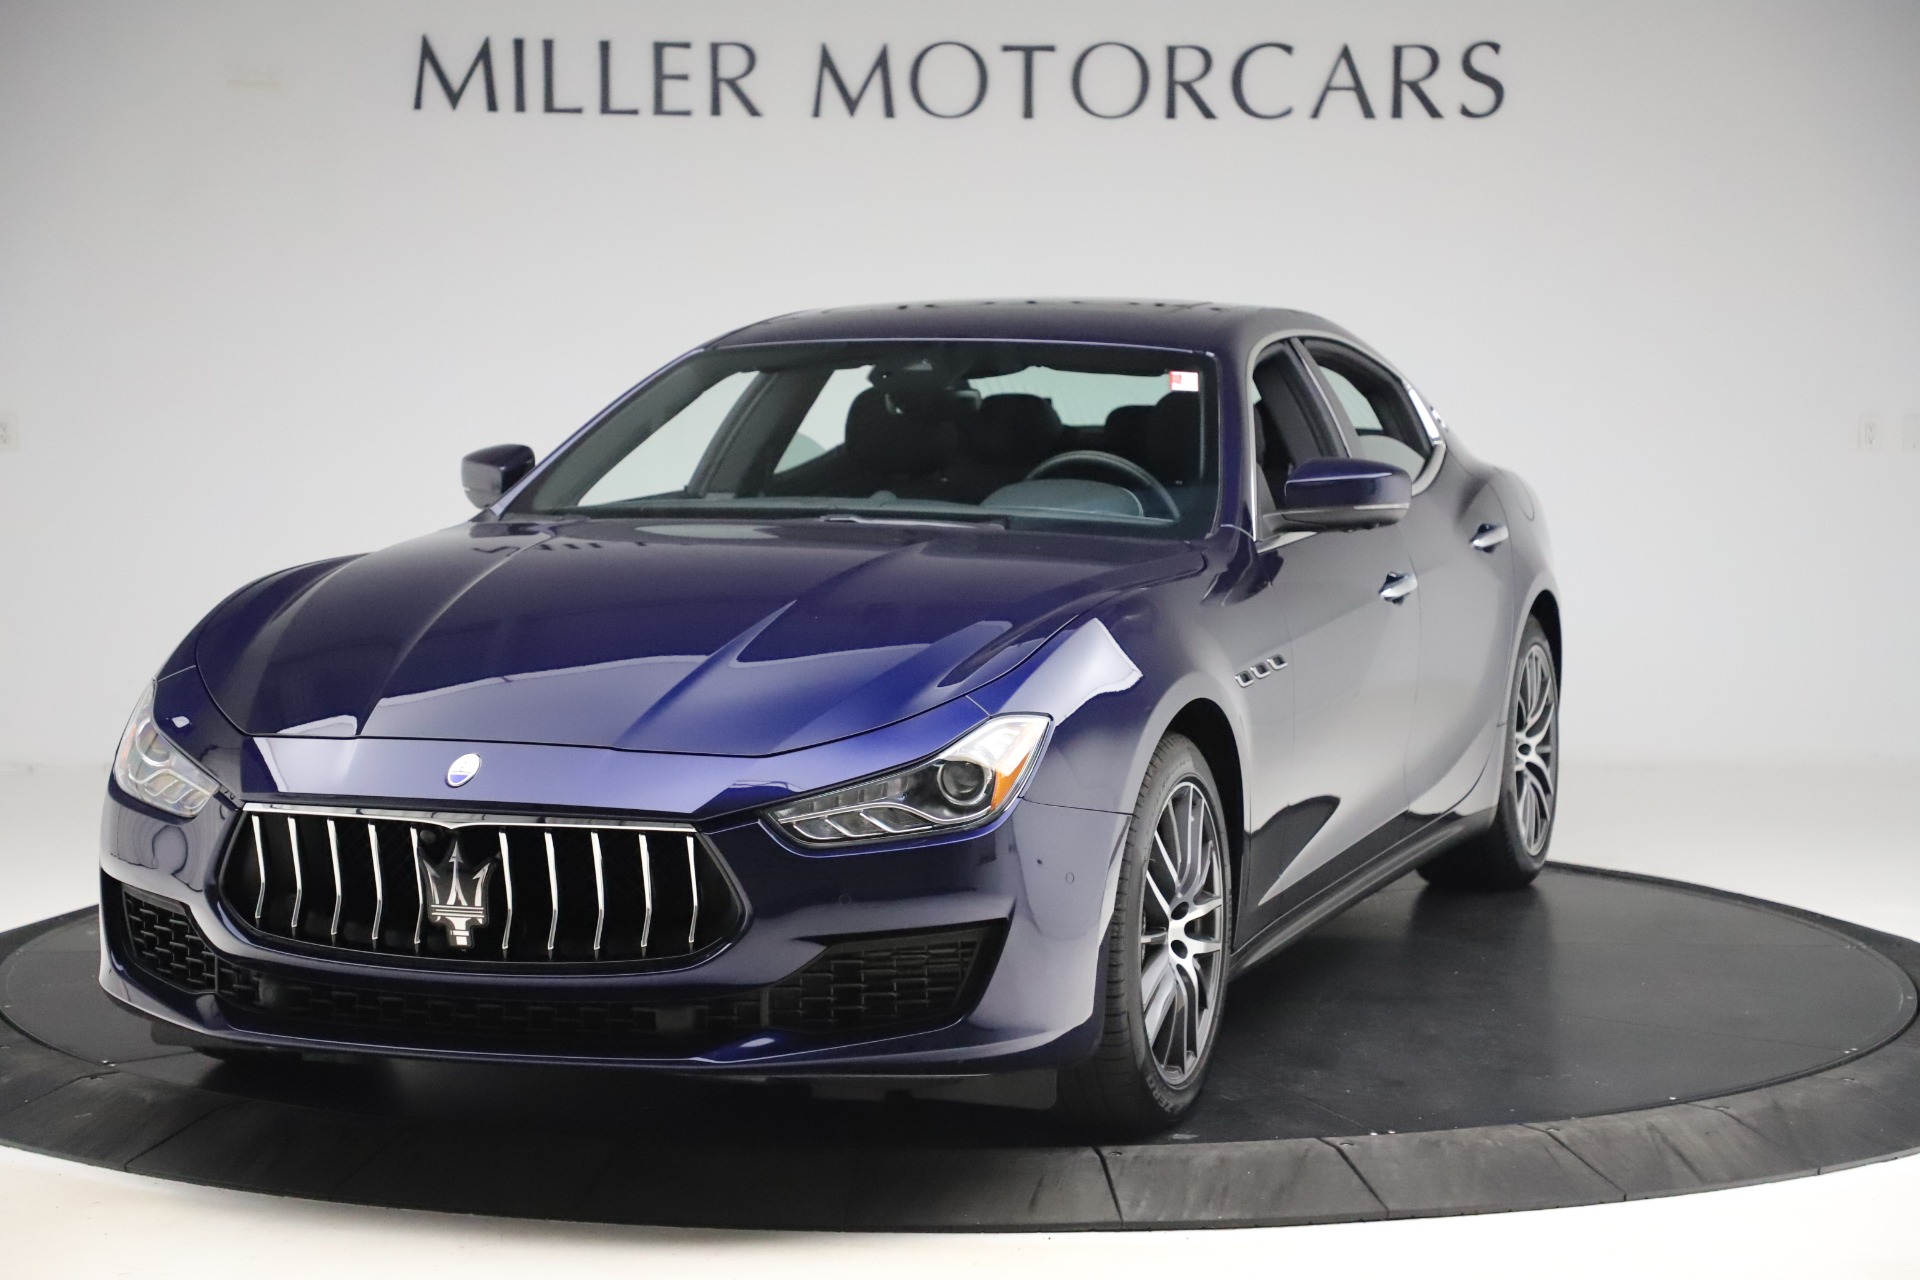 New 2019 Maserati Ghibli S Q4 for sale Sold at Rolls-Royce Motor Cars Greenwich in Greenwich CT 06830 1